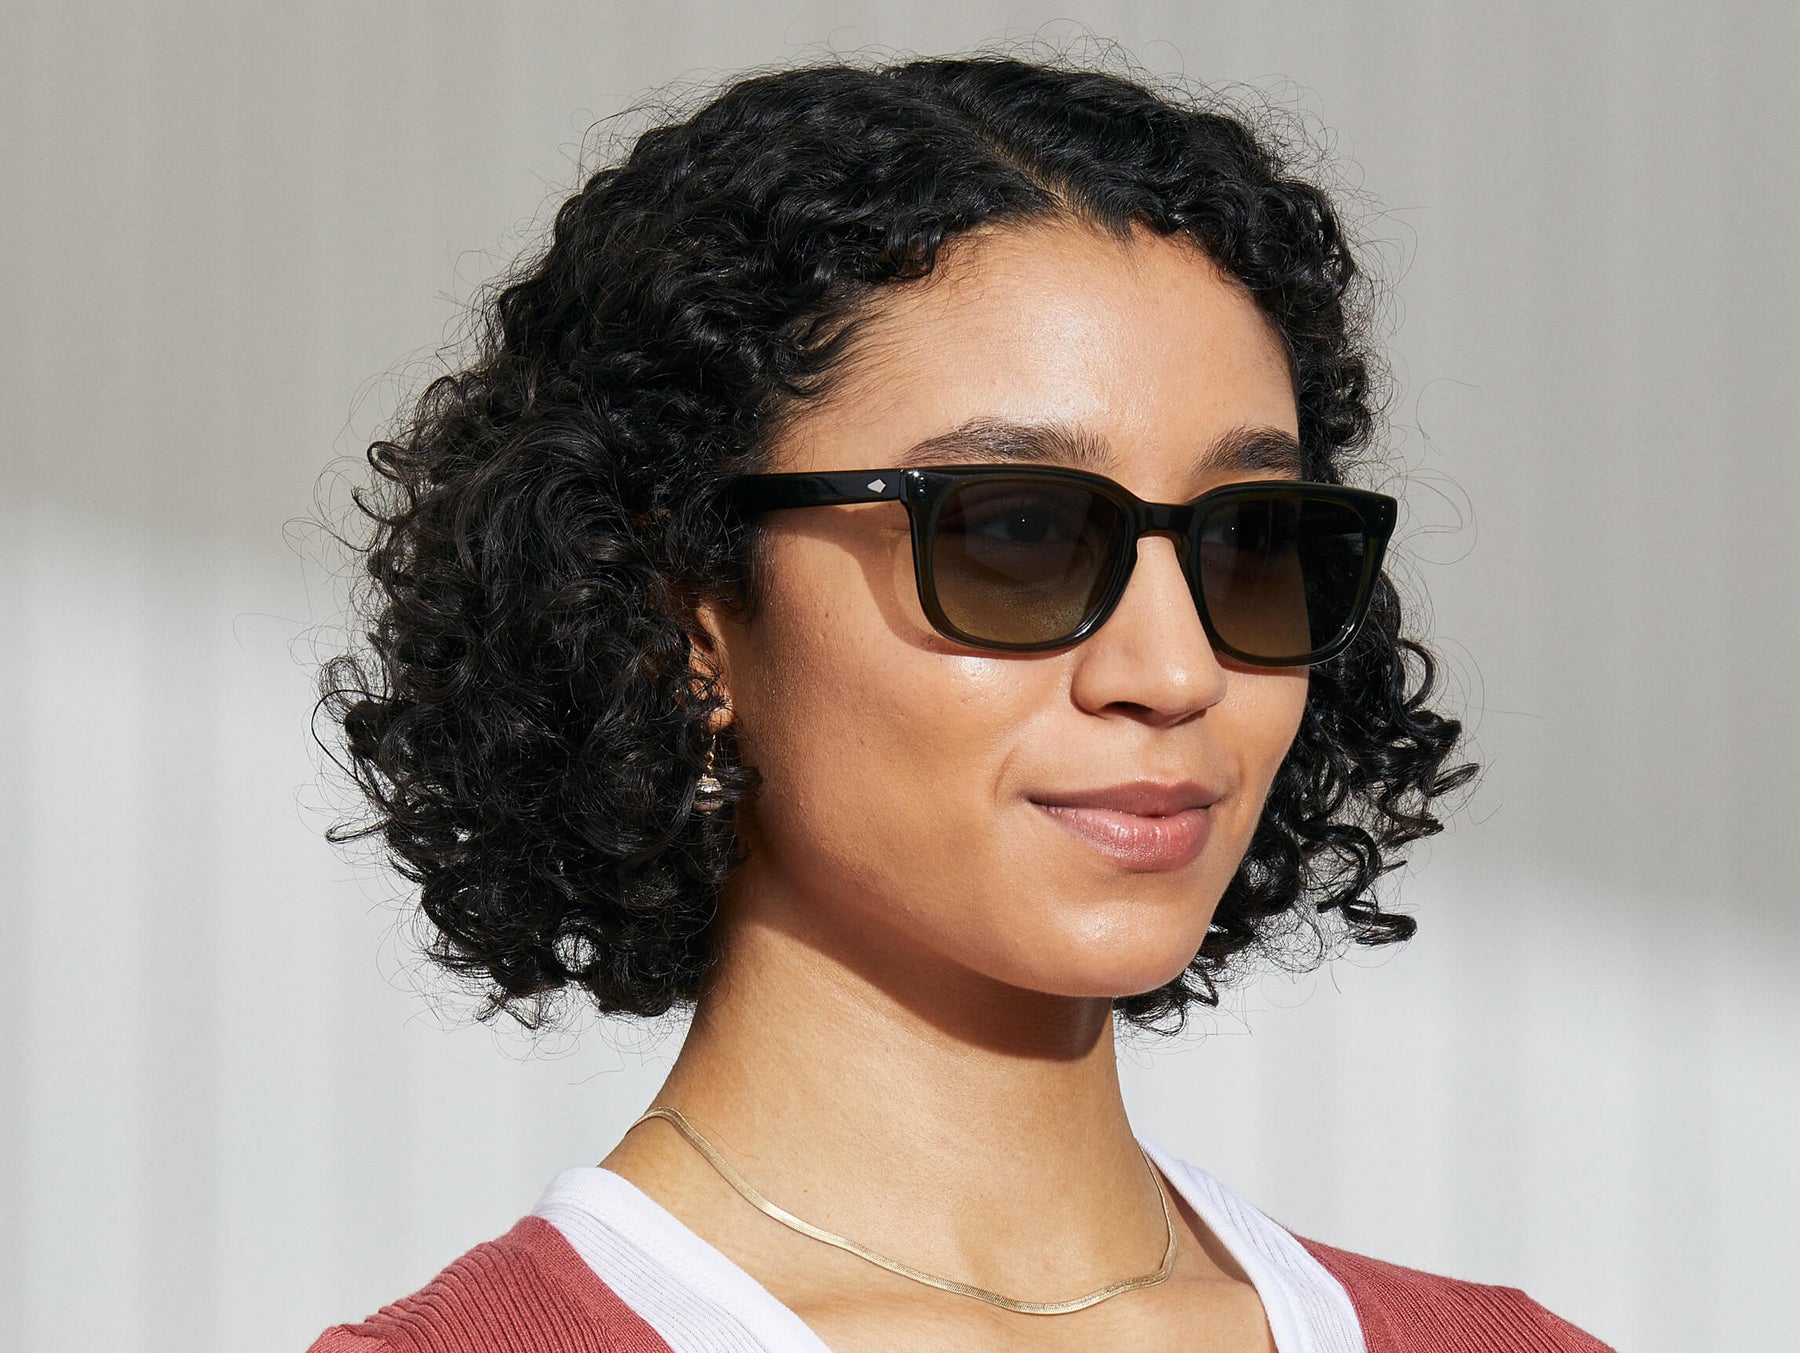 Model is wearing The SHIDDOCK SUN in Dark Green in size 52 with Forest Wood Tinted Lenses